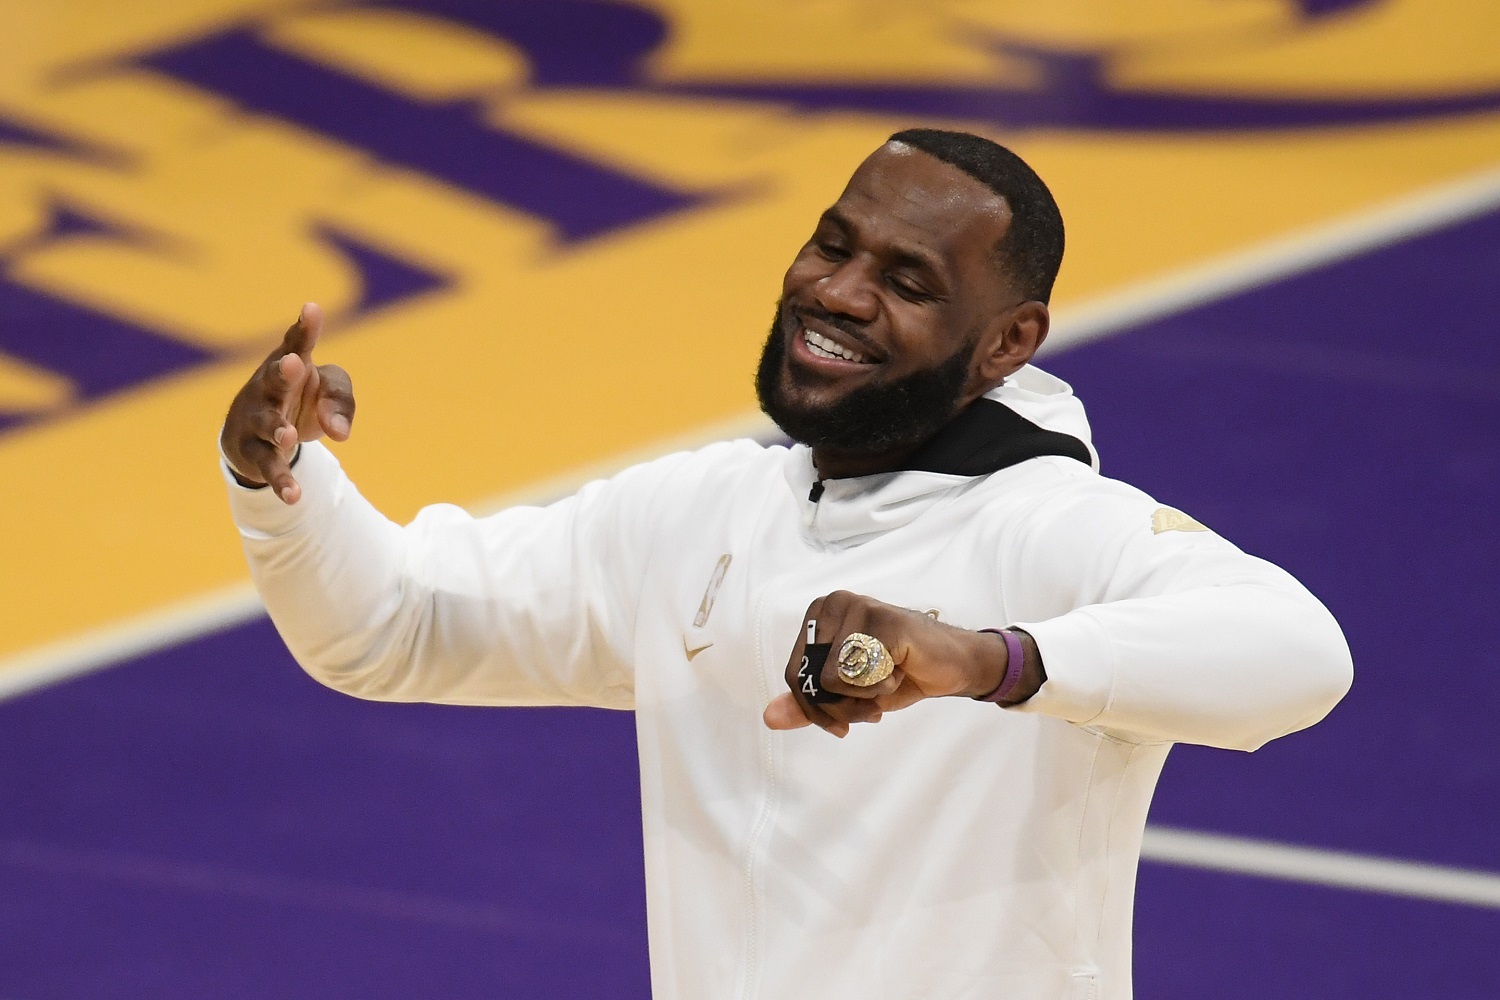 The La Lakers 2020 Nba Championship Rings Are The Most Expensive In History